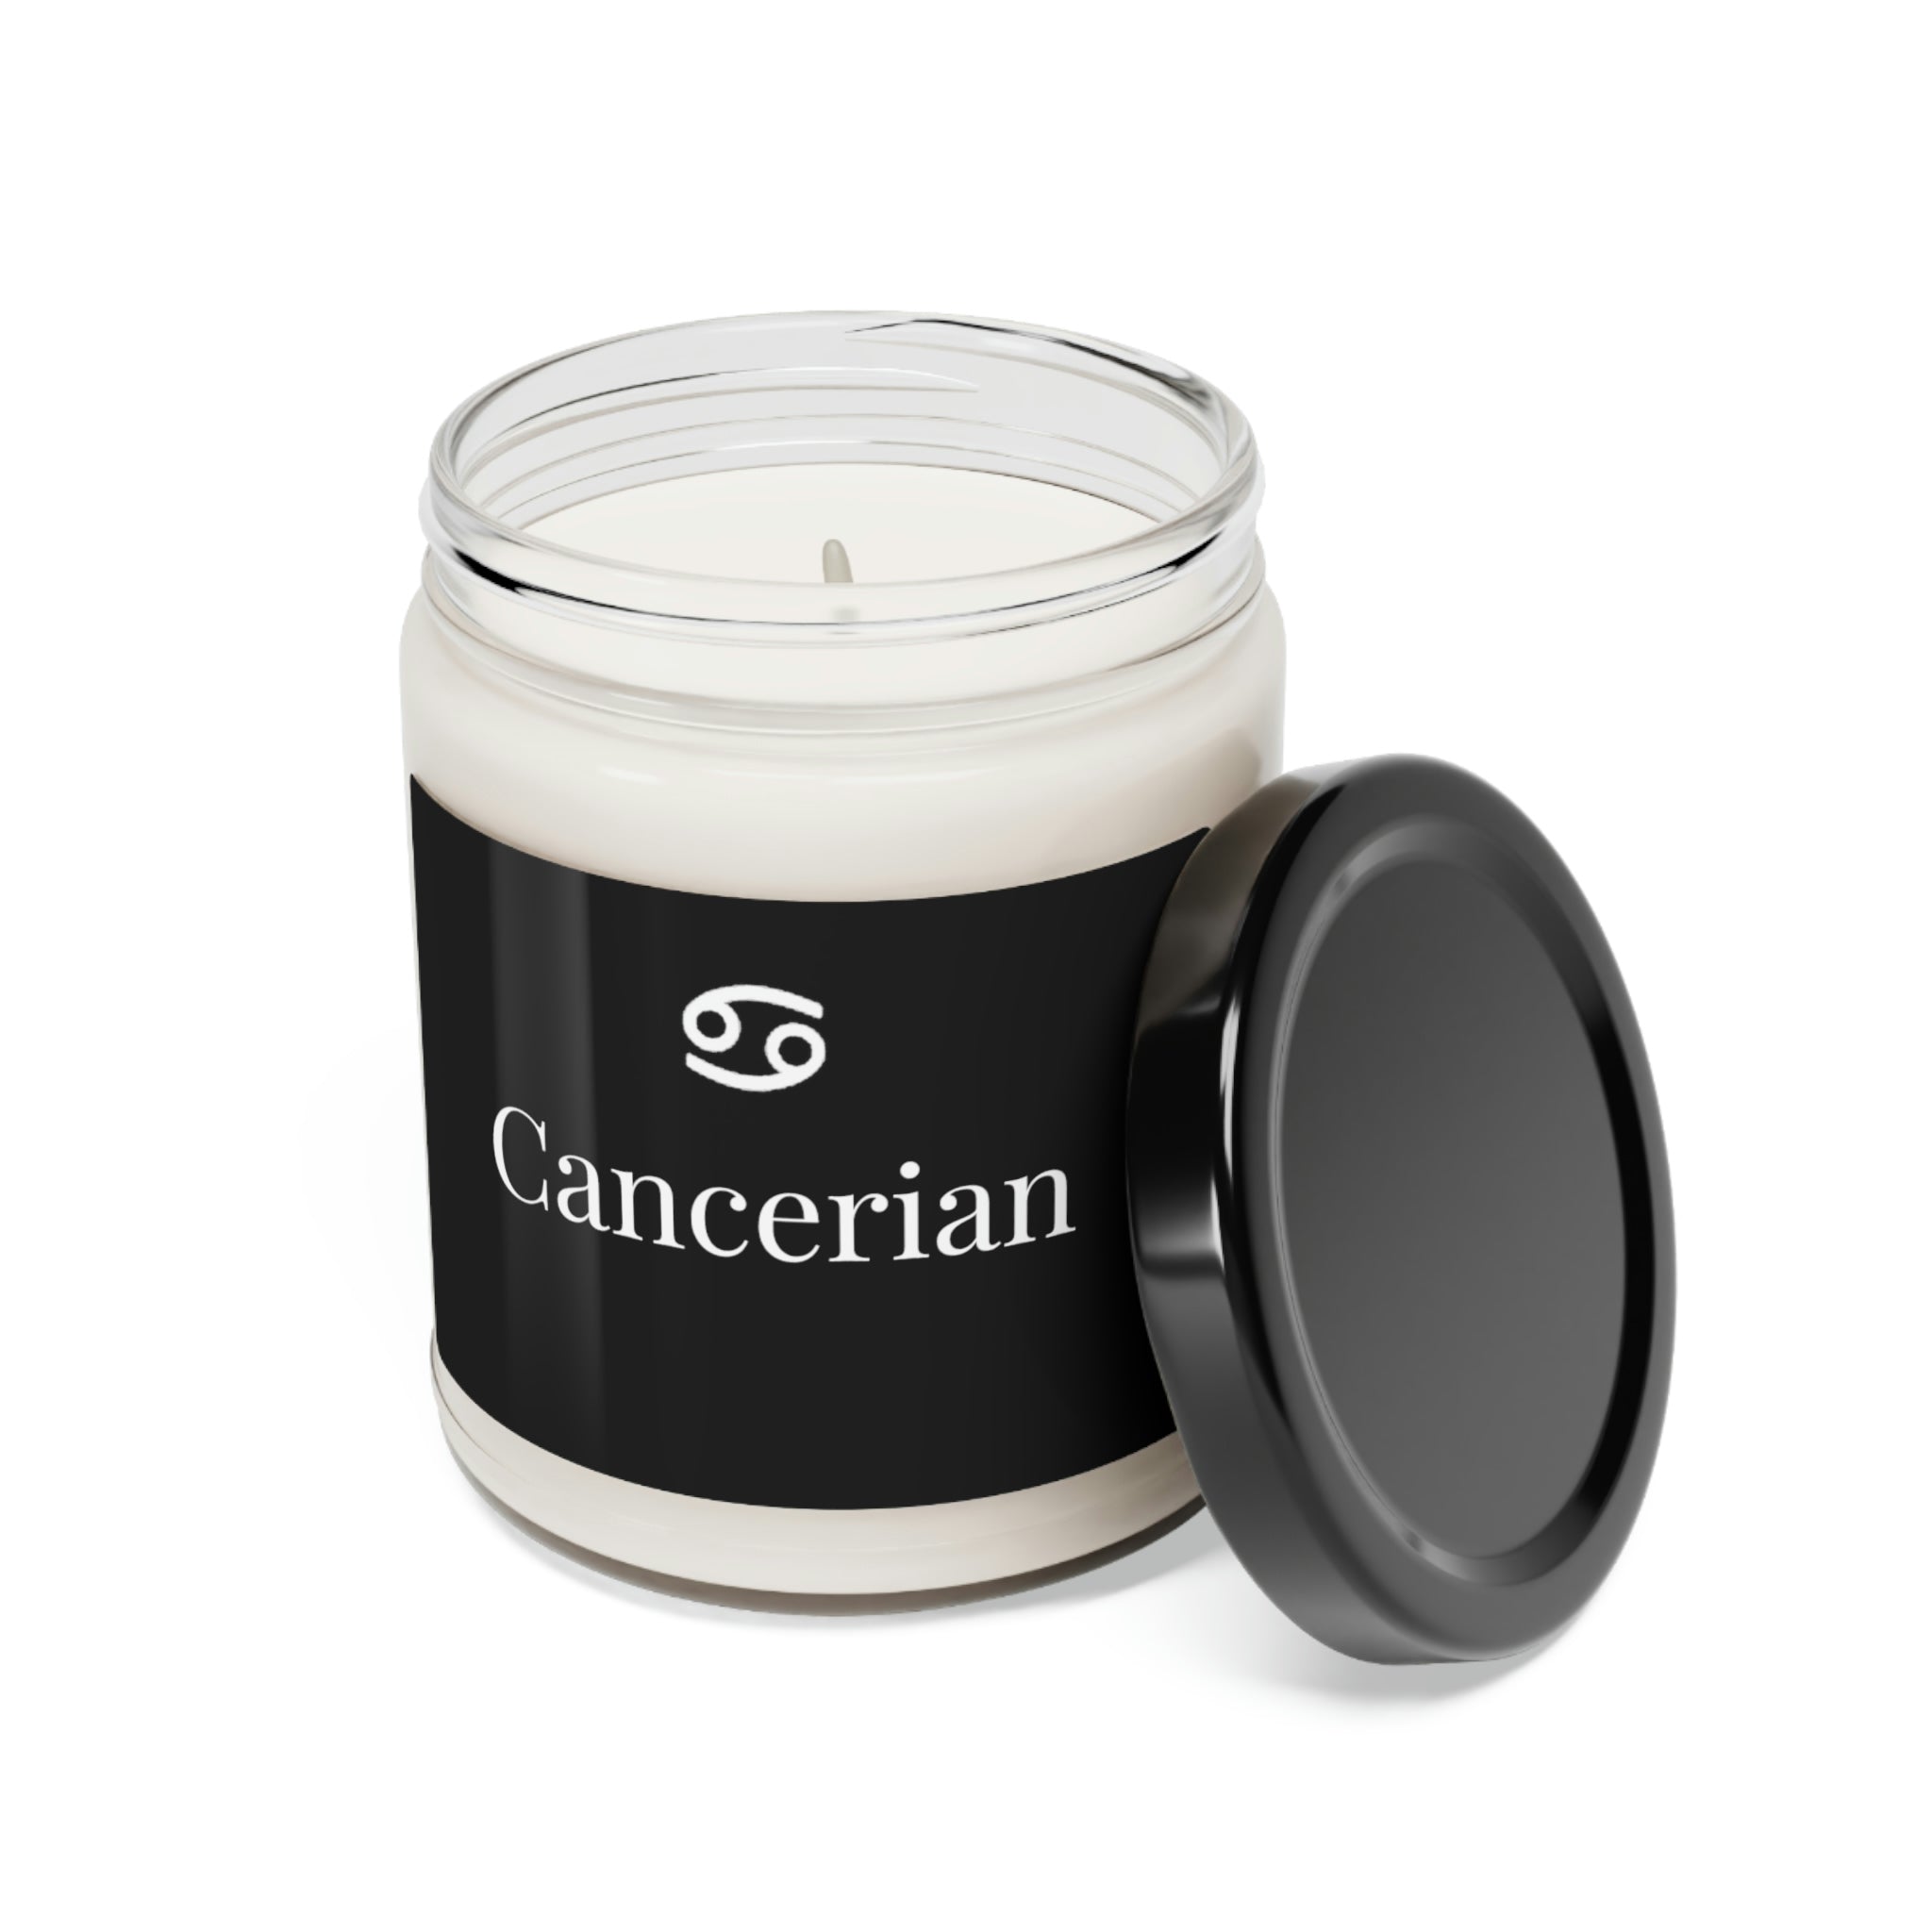 Cancerian Scented Candle